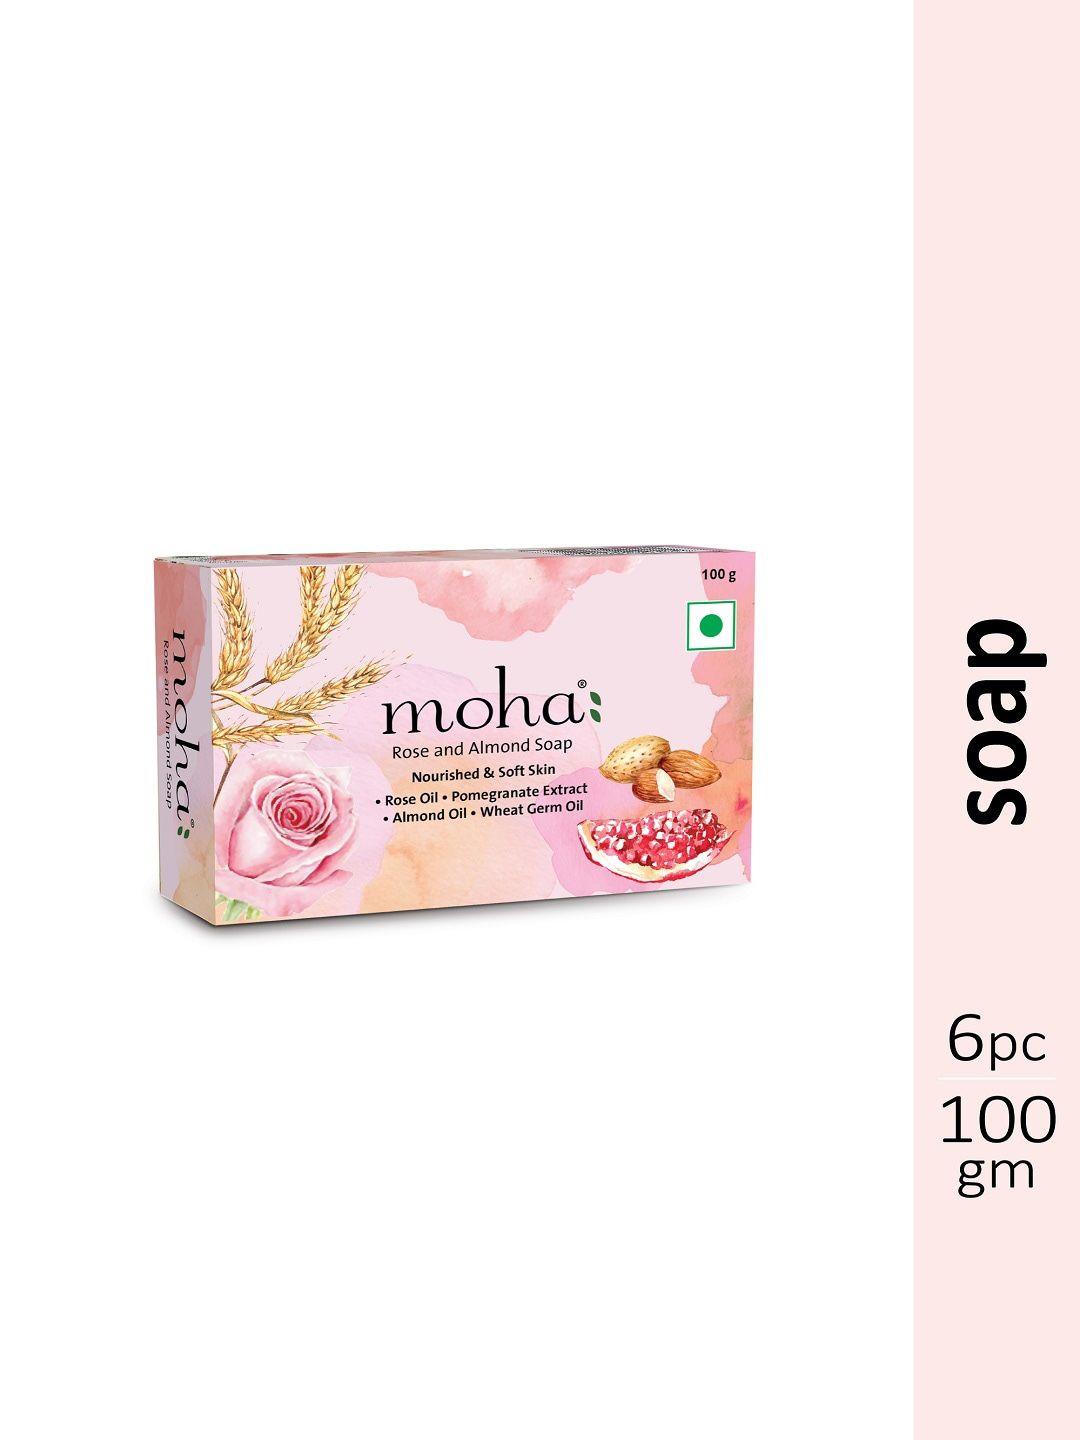 moha set of 6 rose & almond soaps - 100g each